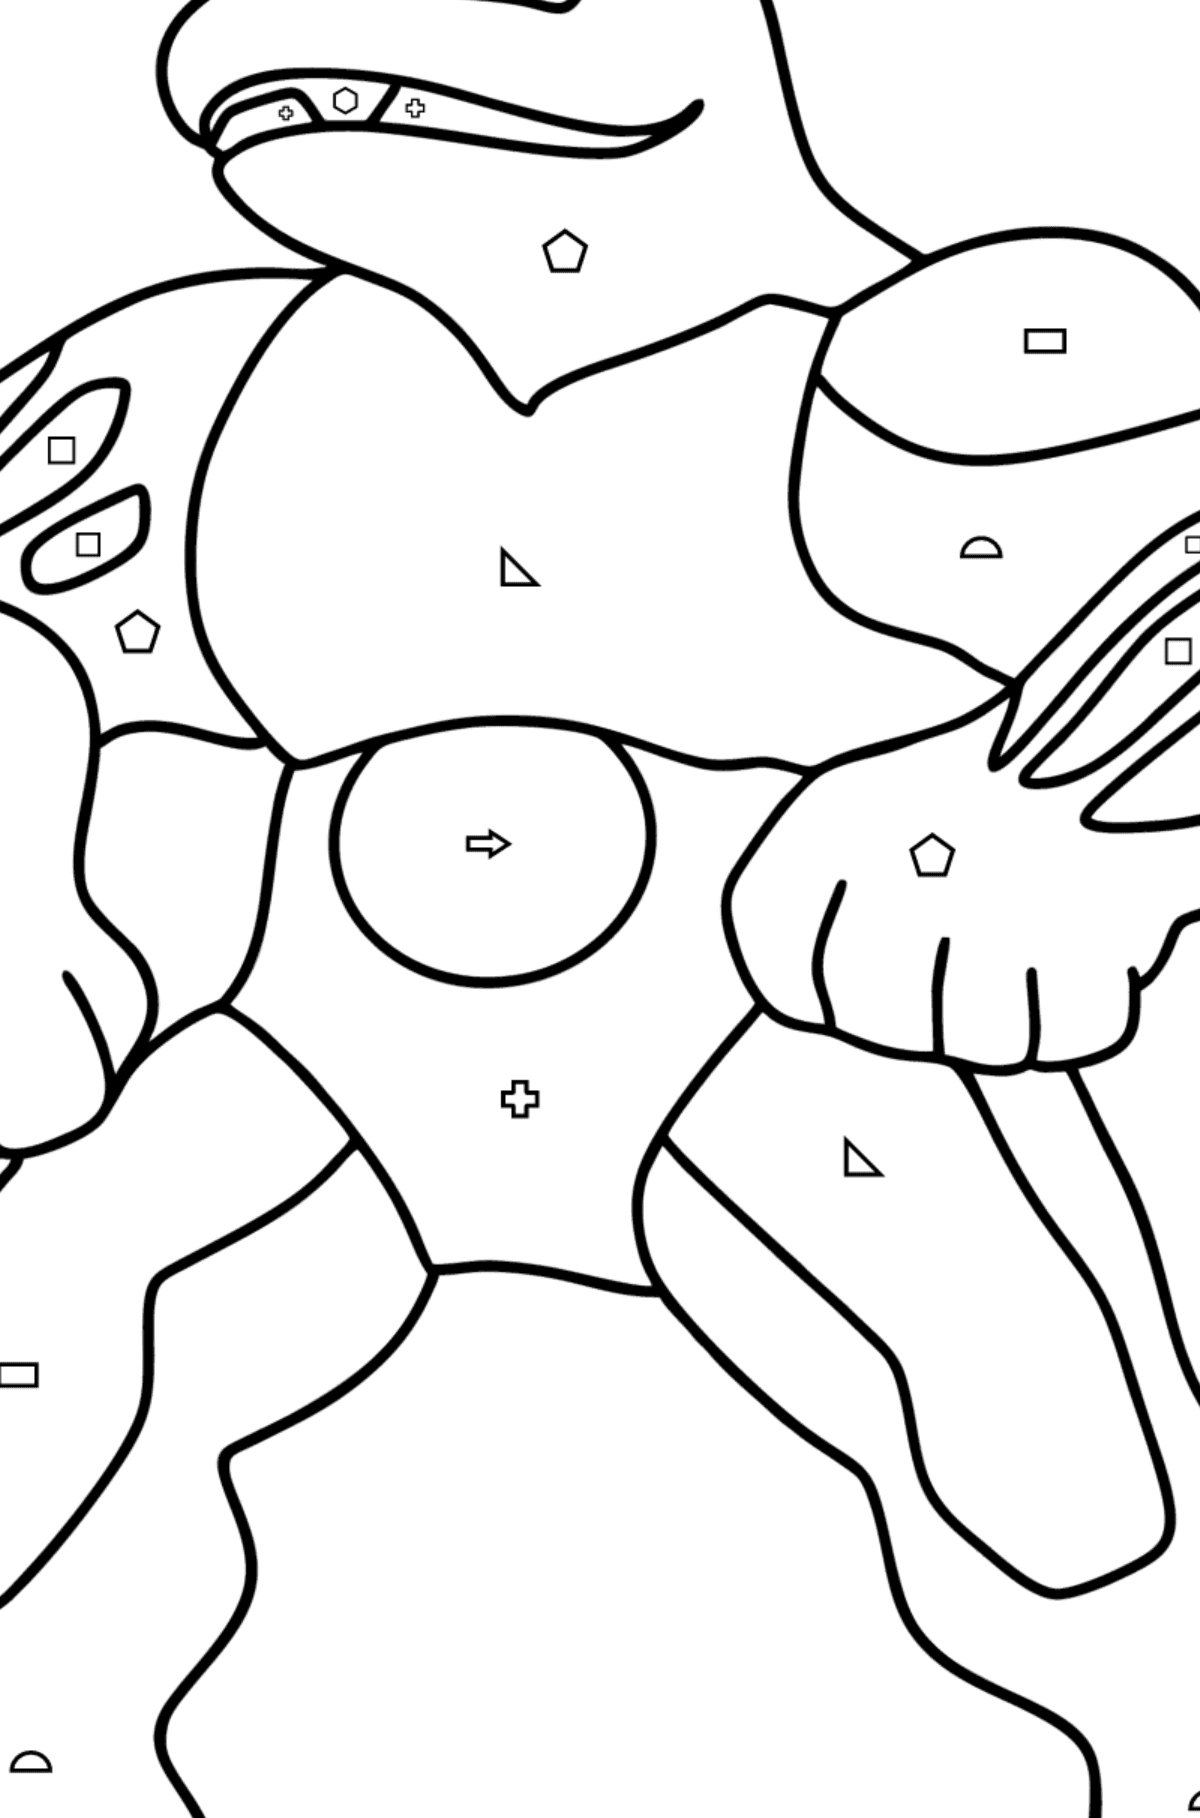 Coloring page Pokemon Go Machoke - Coloring by Geometric Shapes for Kids